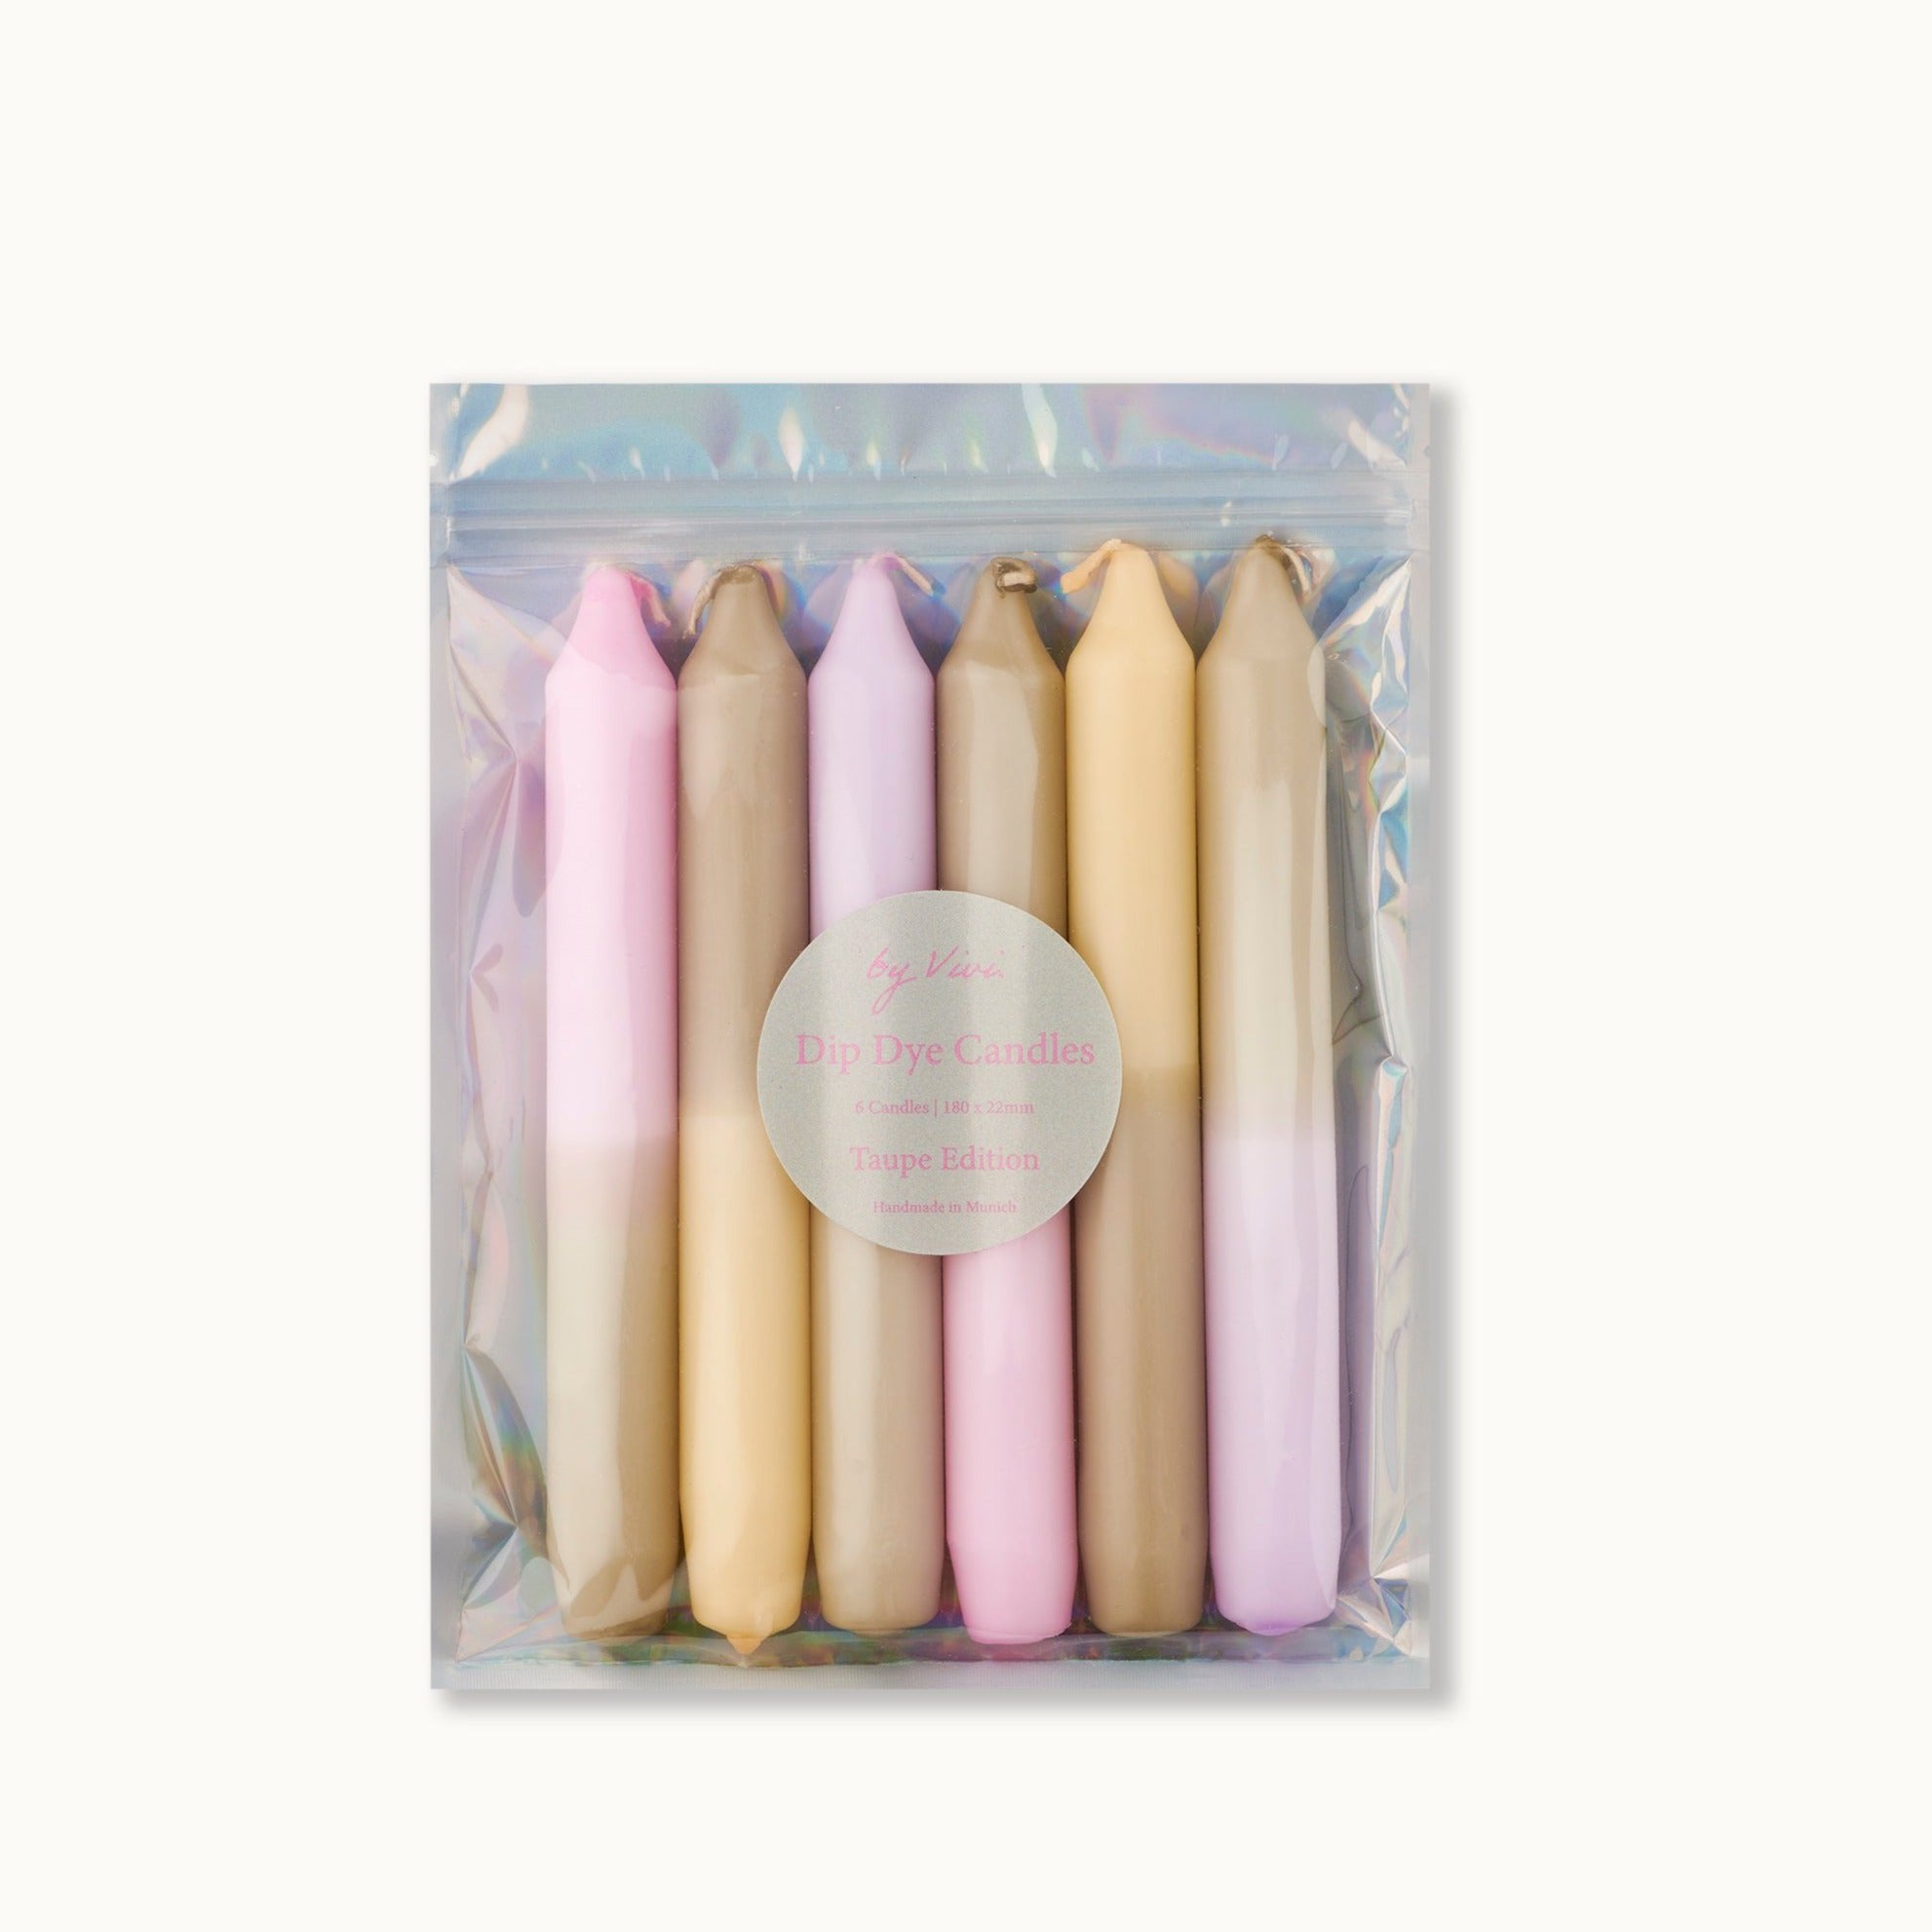 Dip dye candles in a set: Taupe Edition